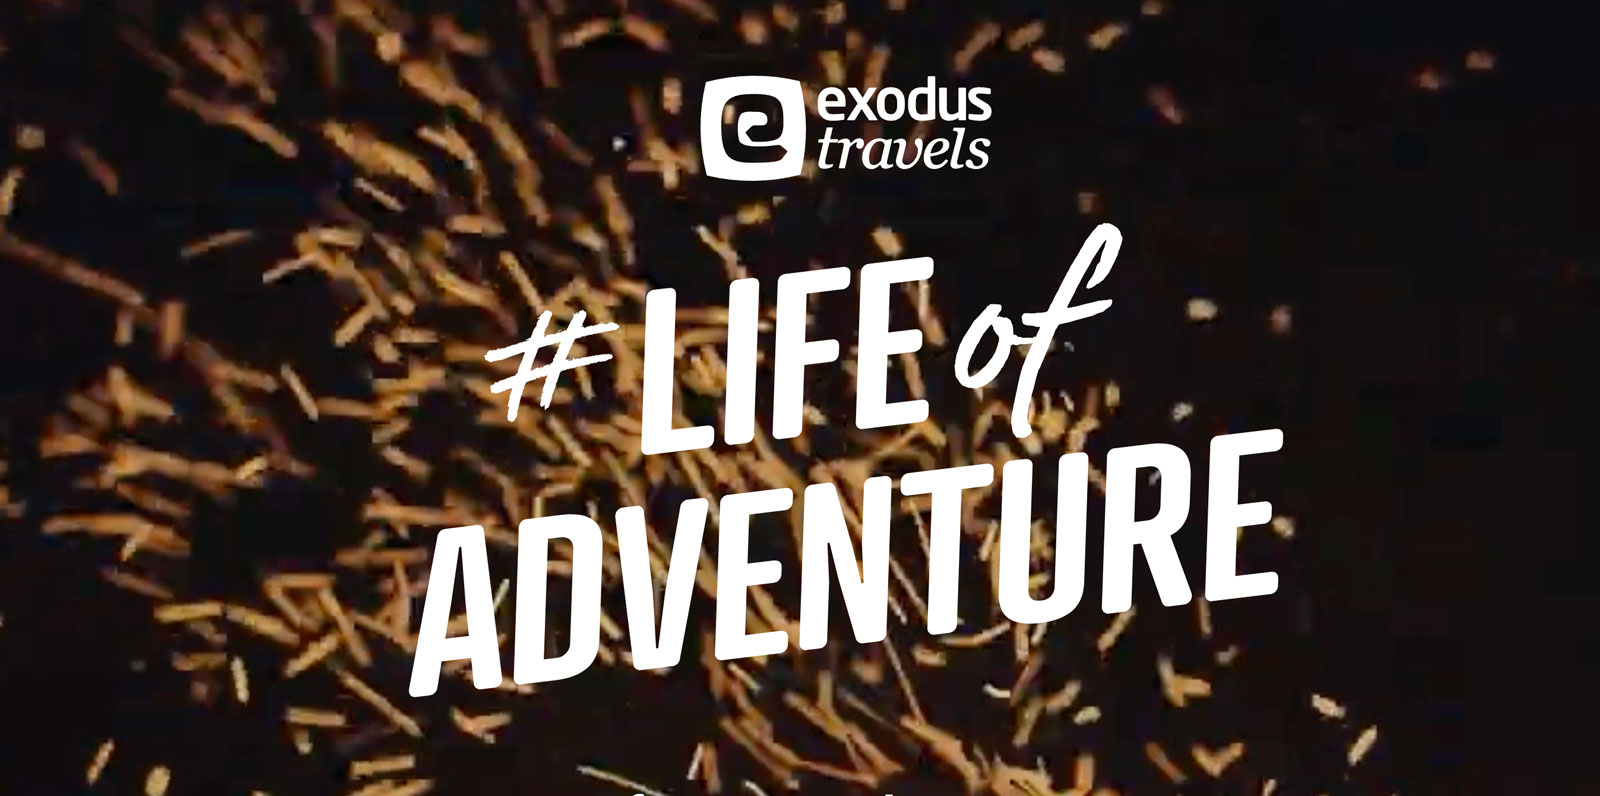 Win a Life of Adventure – The Ultimate Bucket List Adventure Giveaway